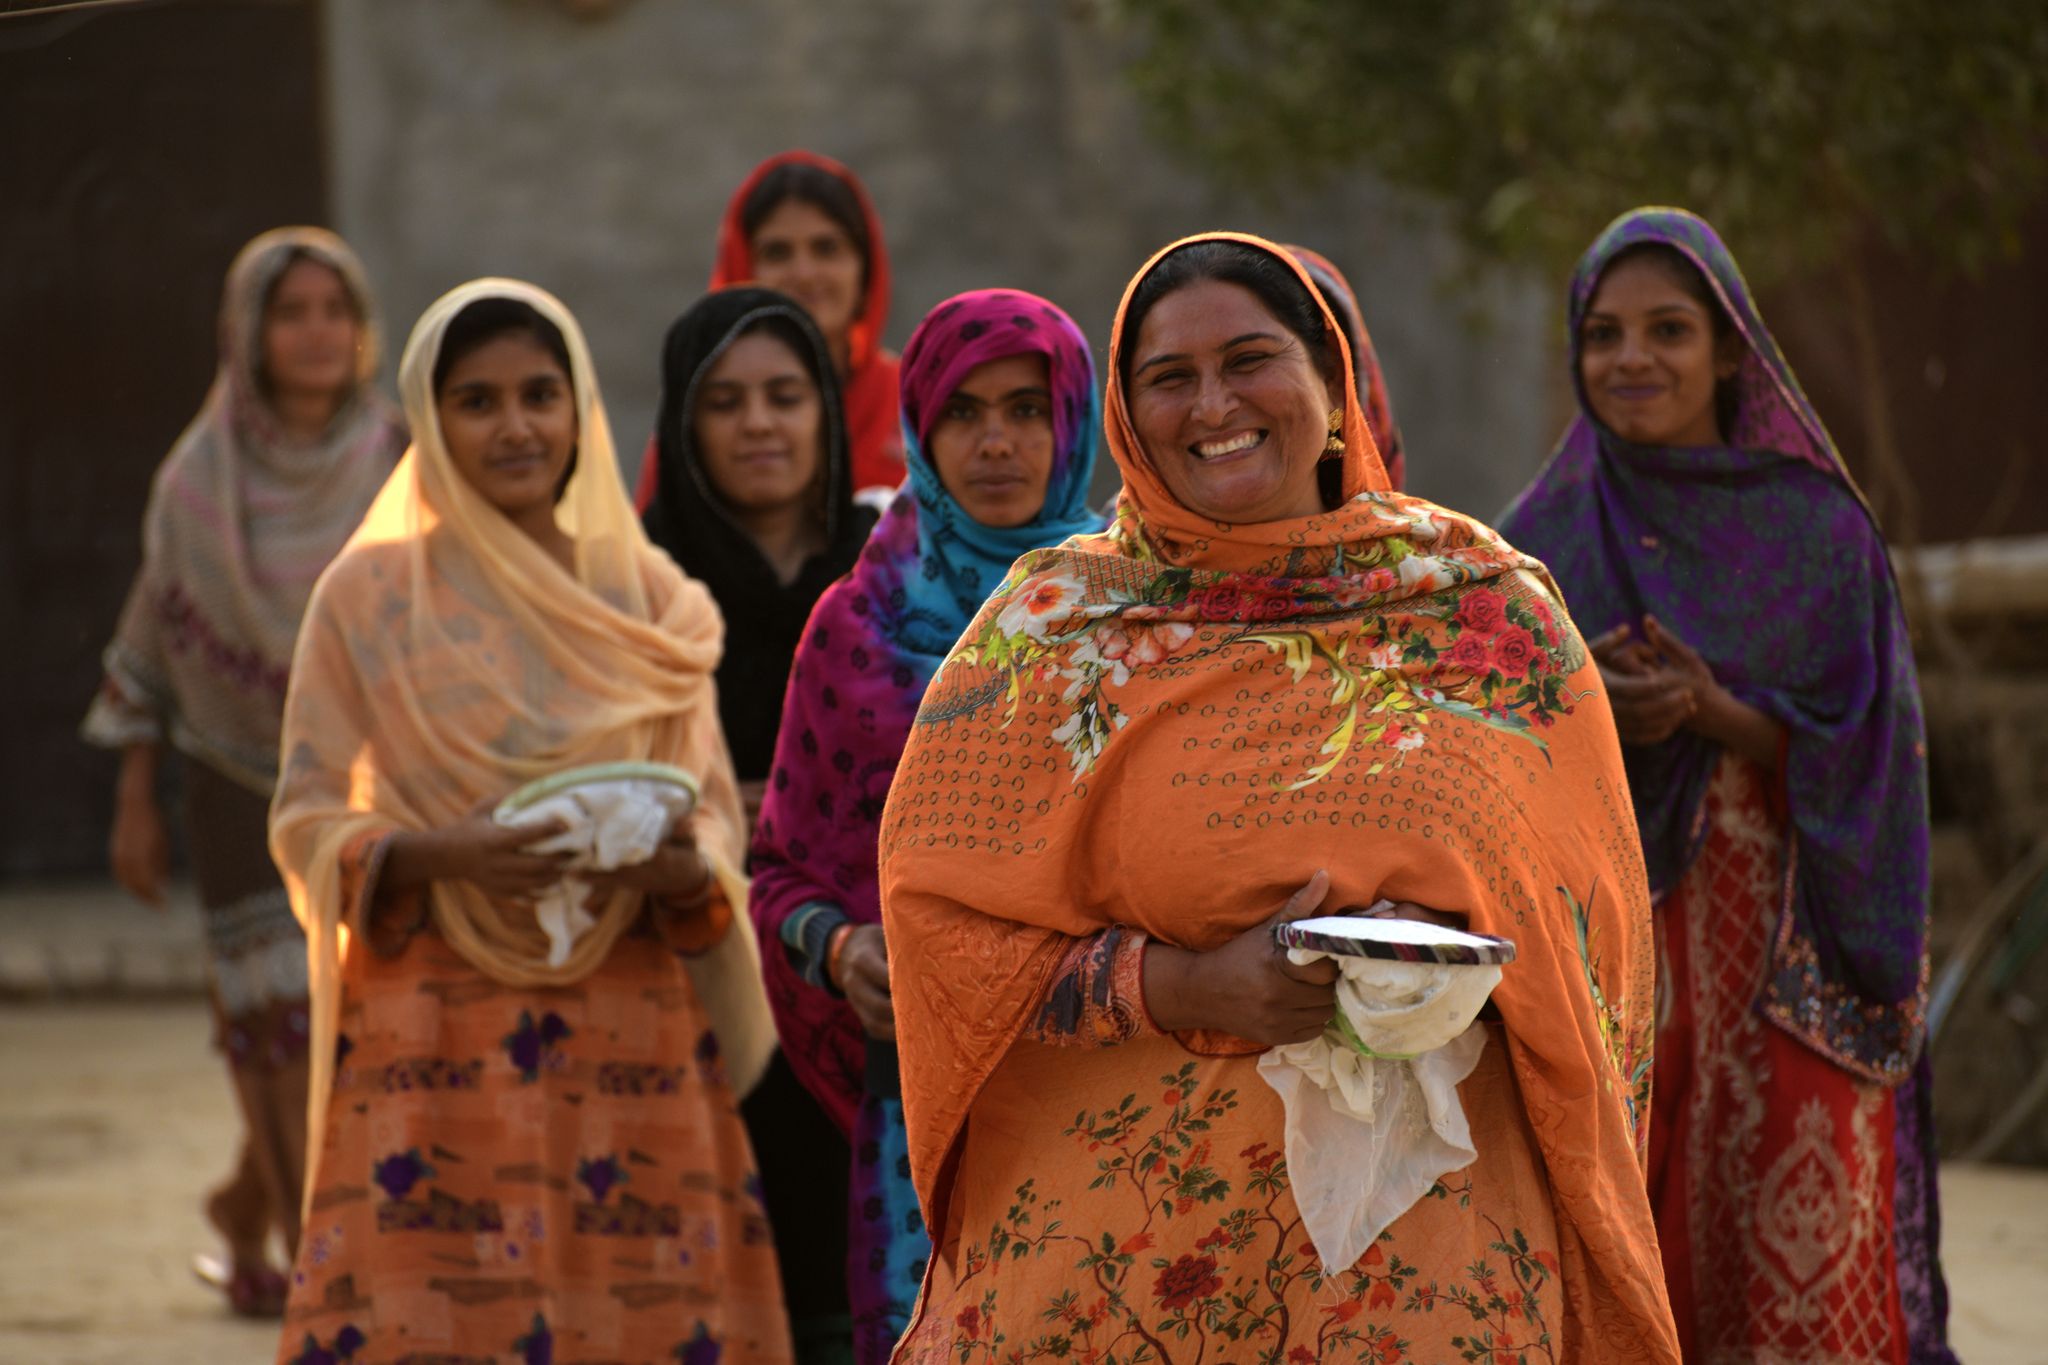 Women in Pakistan with their embroidery.